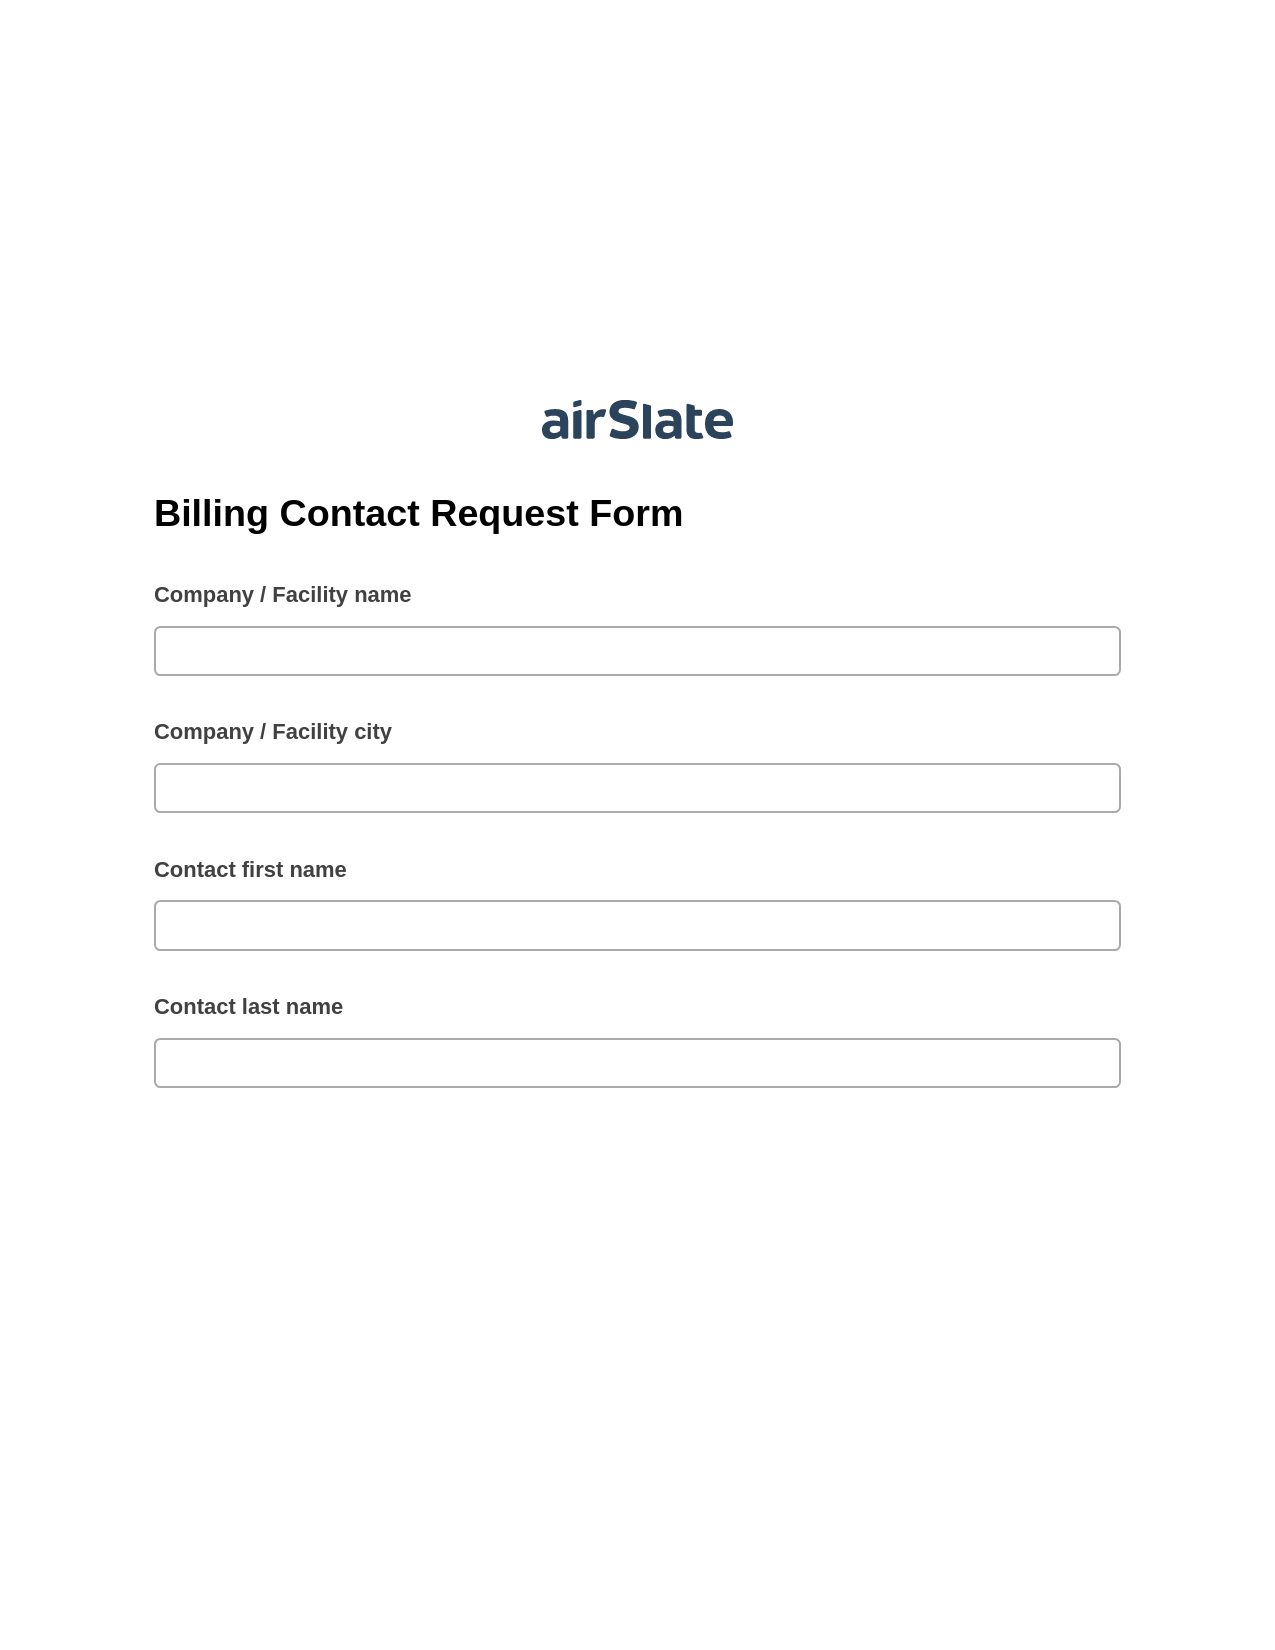 Multirole Billing Contact Request Form Pre-fill Document Bot, Reminder Bot, Google Drive Bot